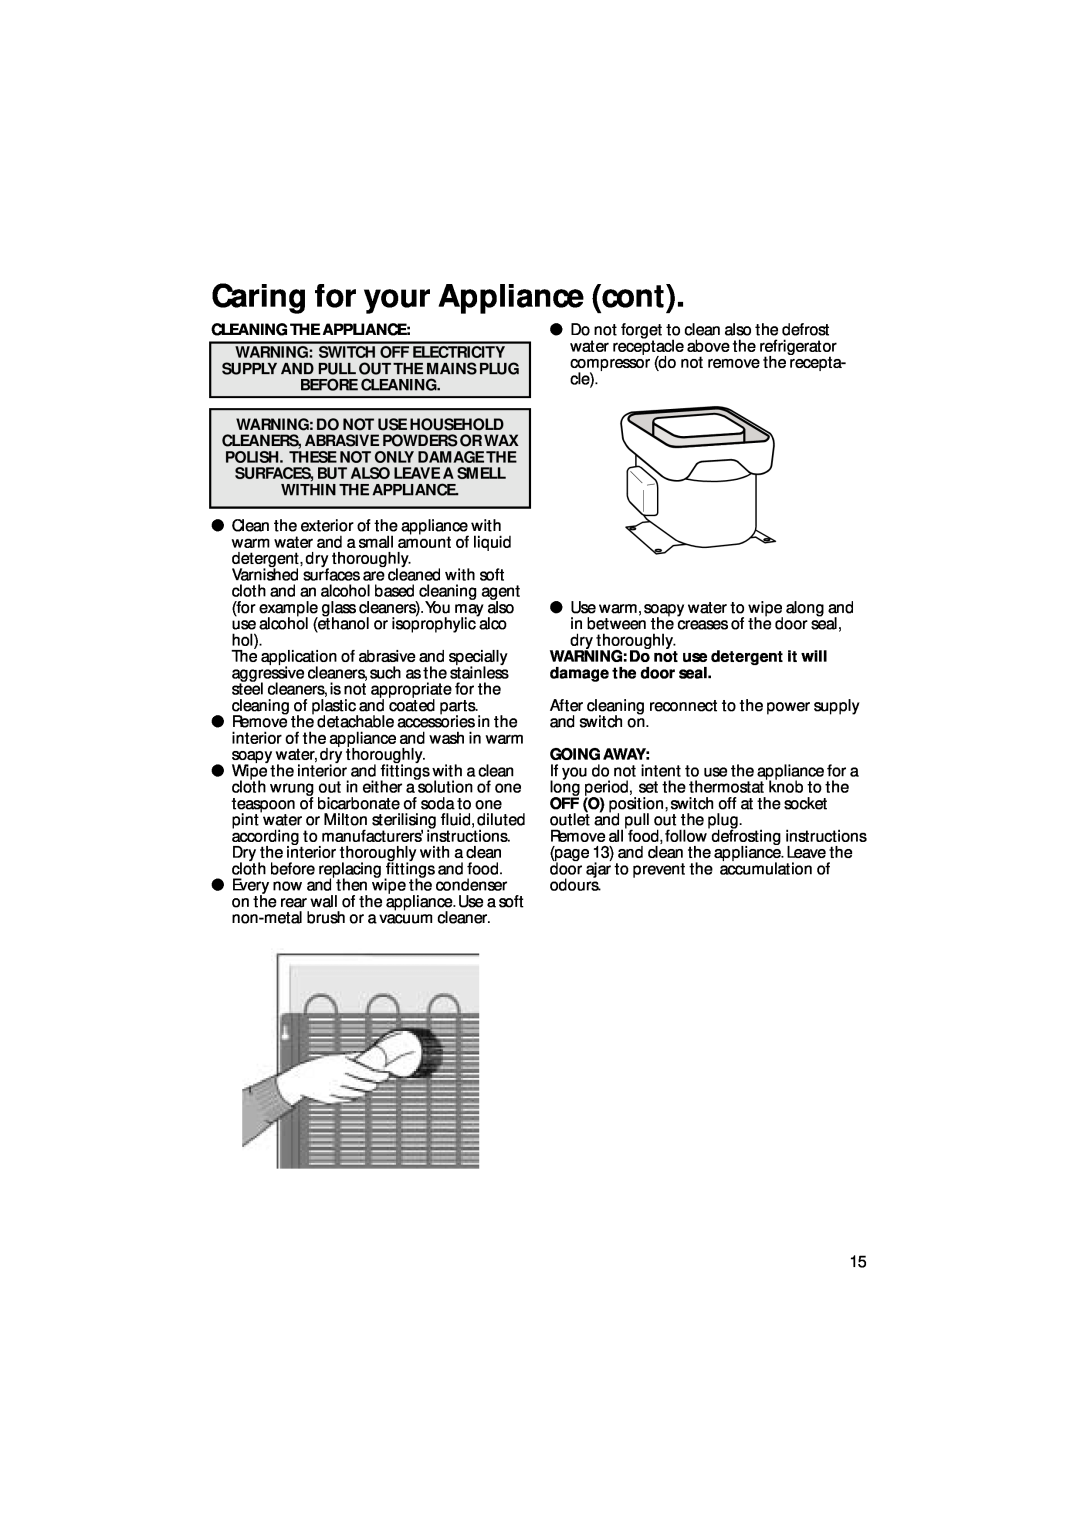 Hotpoint HM311i manual Caring for your Appliance cont, Cleaning The Appliance, Going Away 